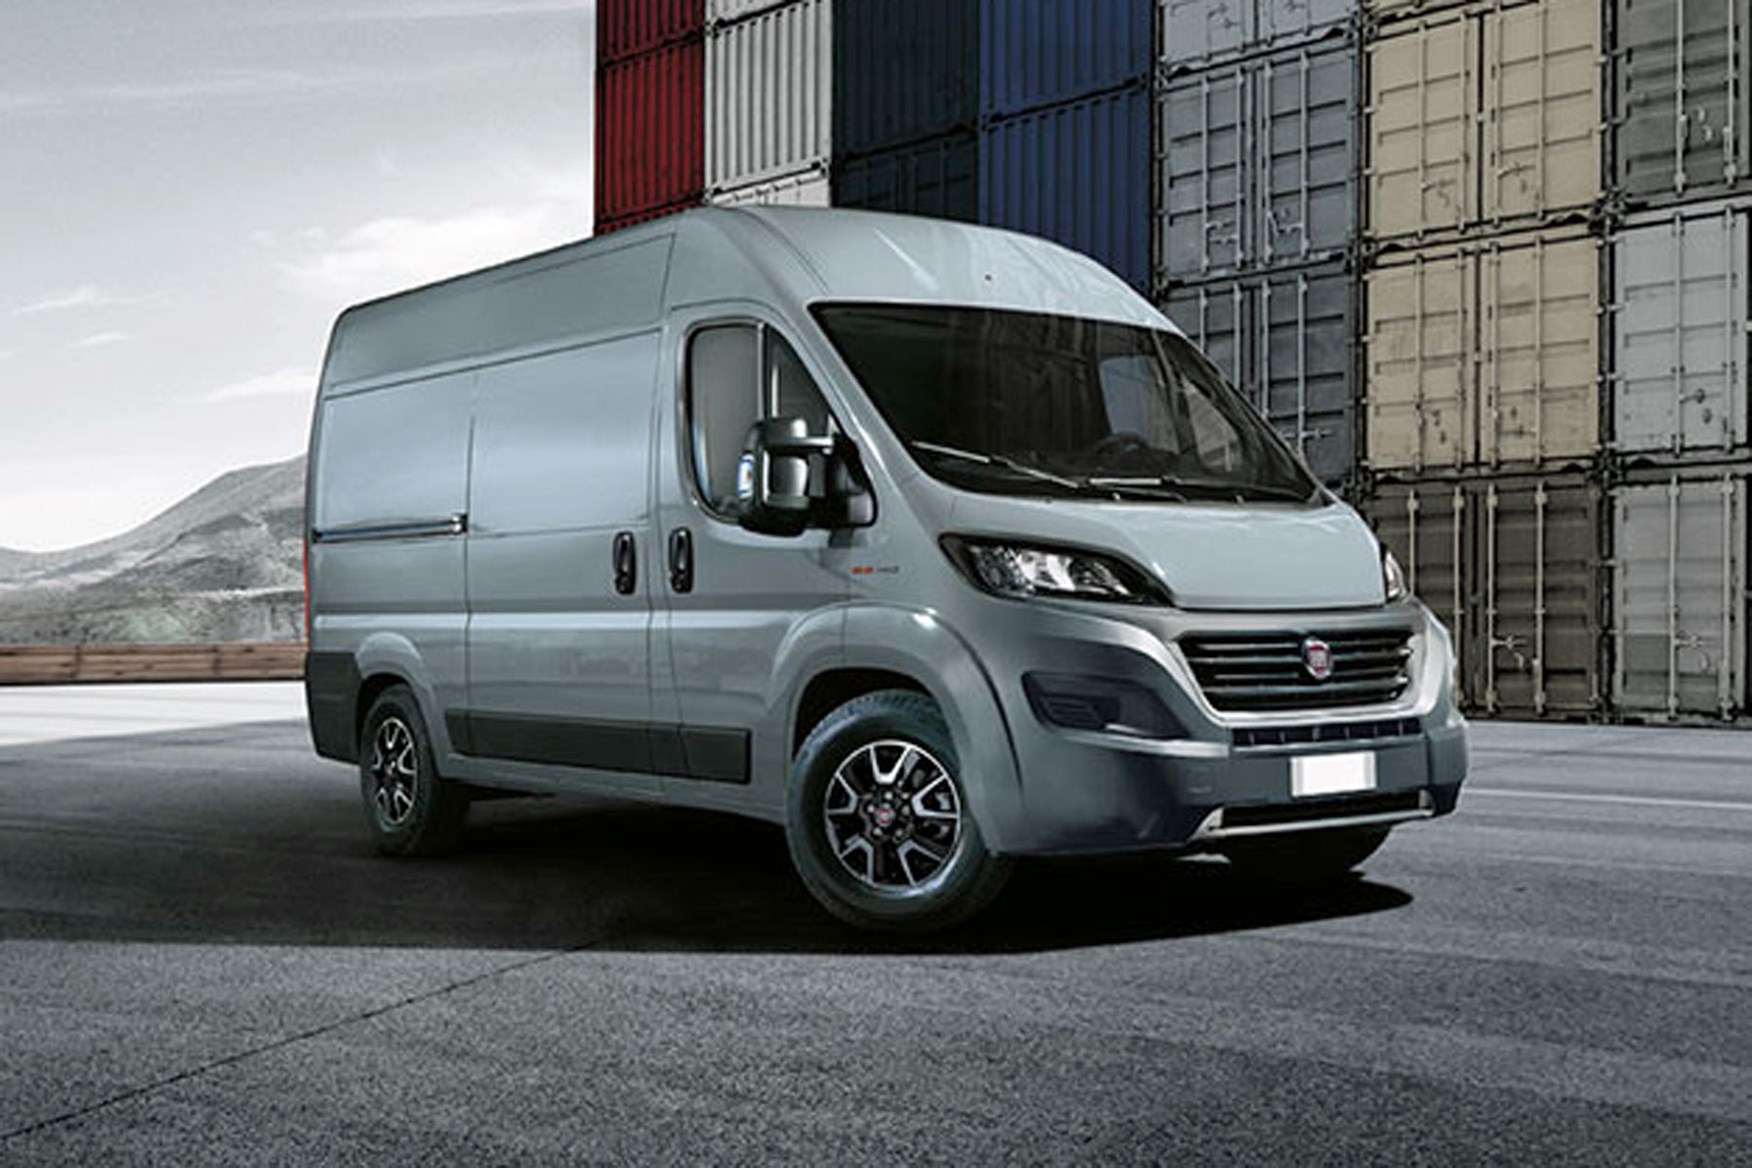 Fiat Ducato Shadow Edition the stylish large van you